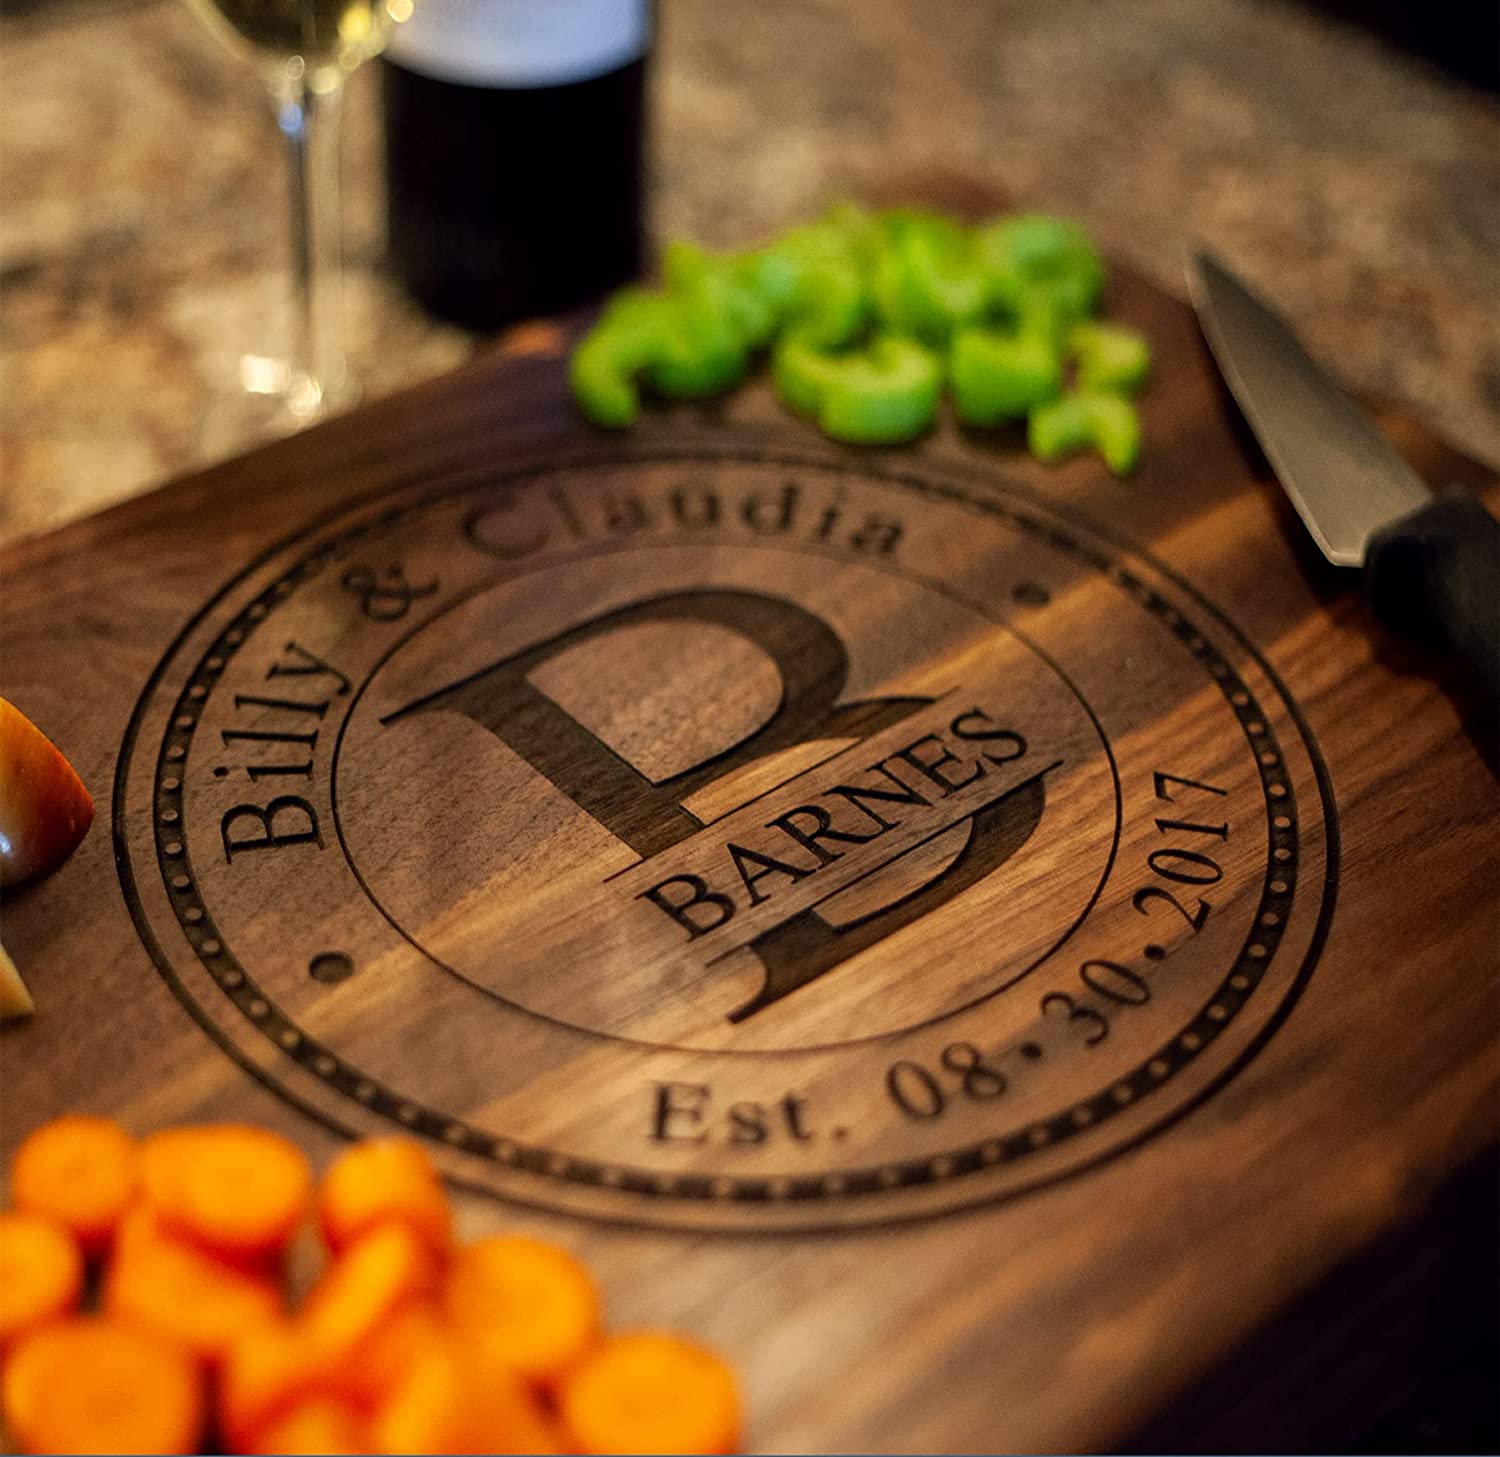 NakedWoodWorks Serving Customized Cutting Board Gift